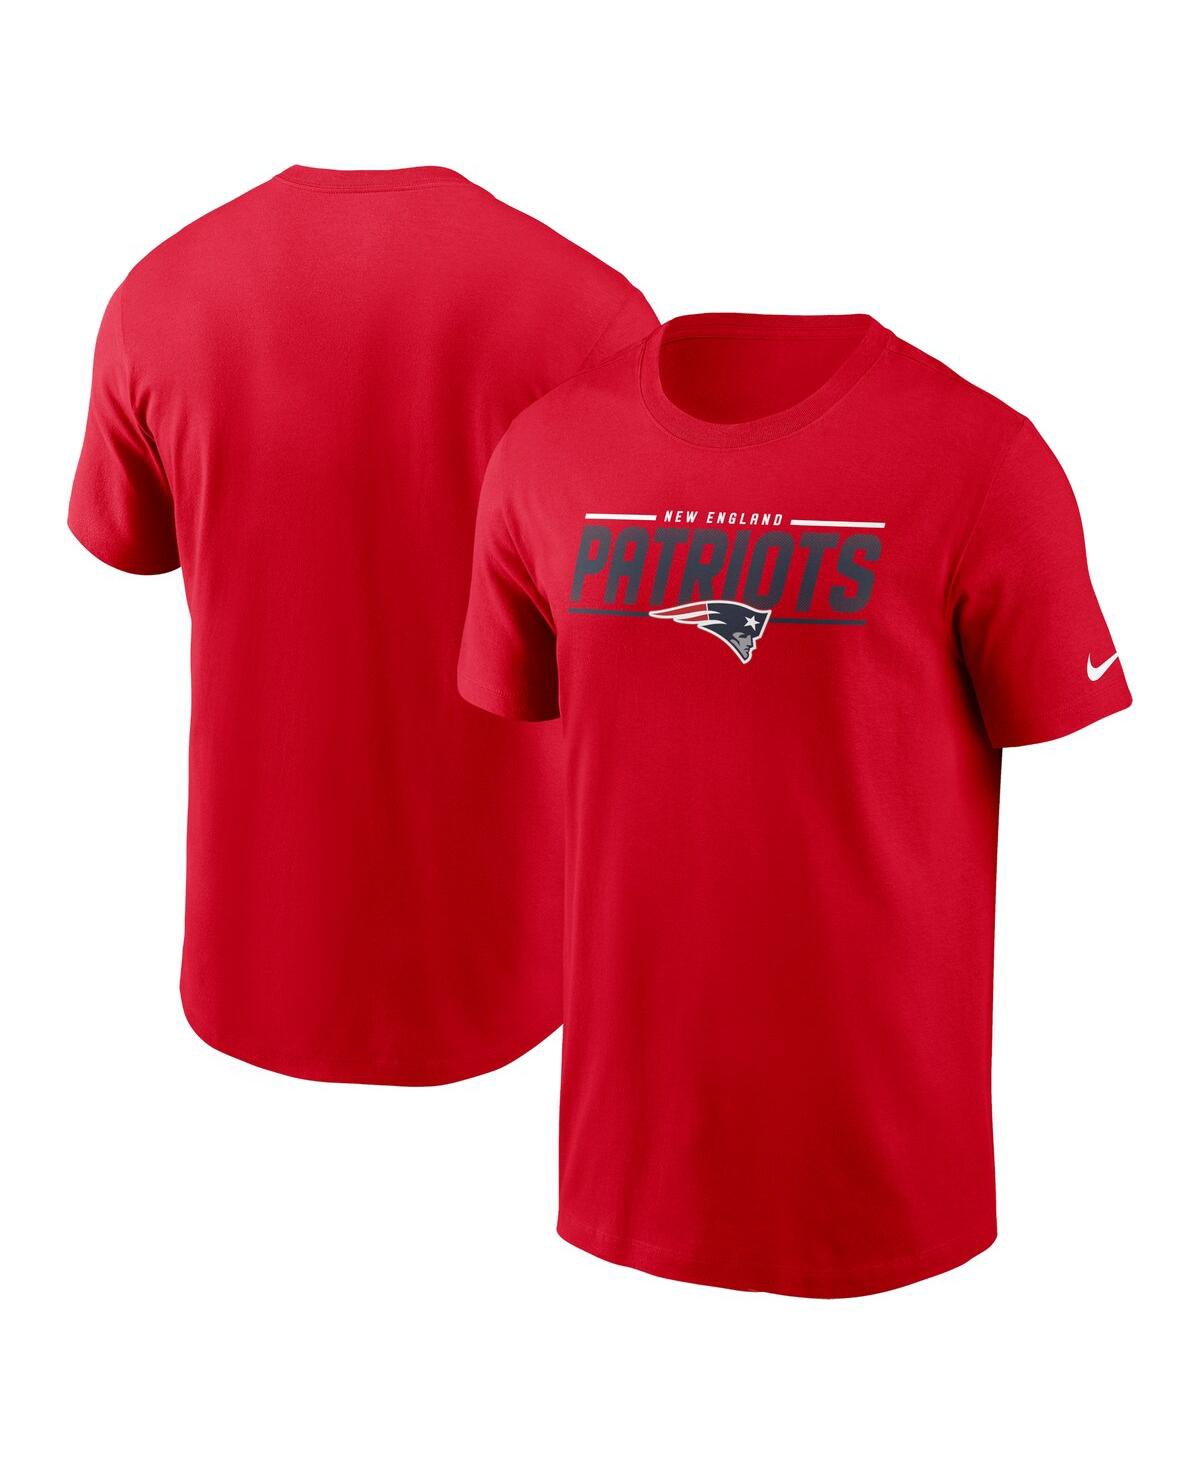 Nike Men's  Red New England Patriots Muscle T-shirt